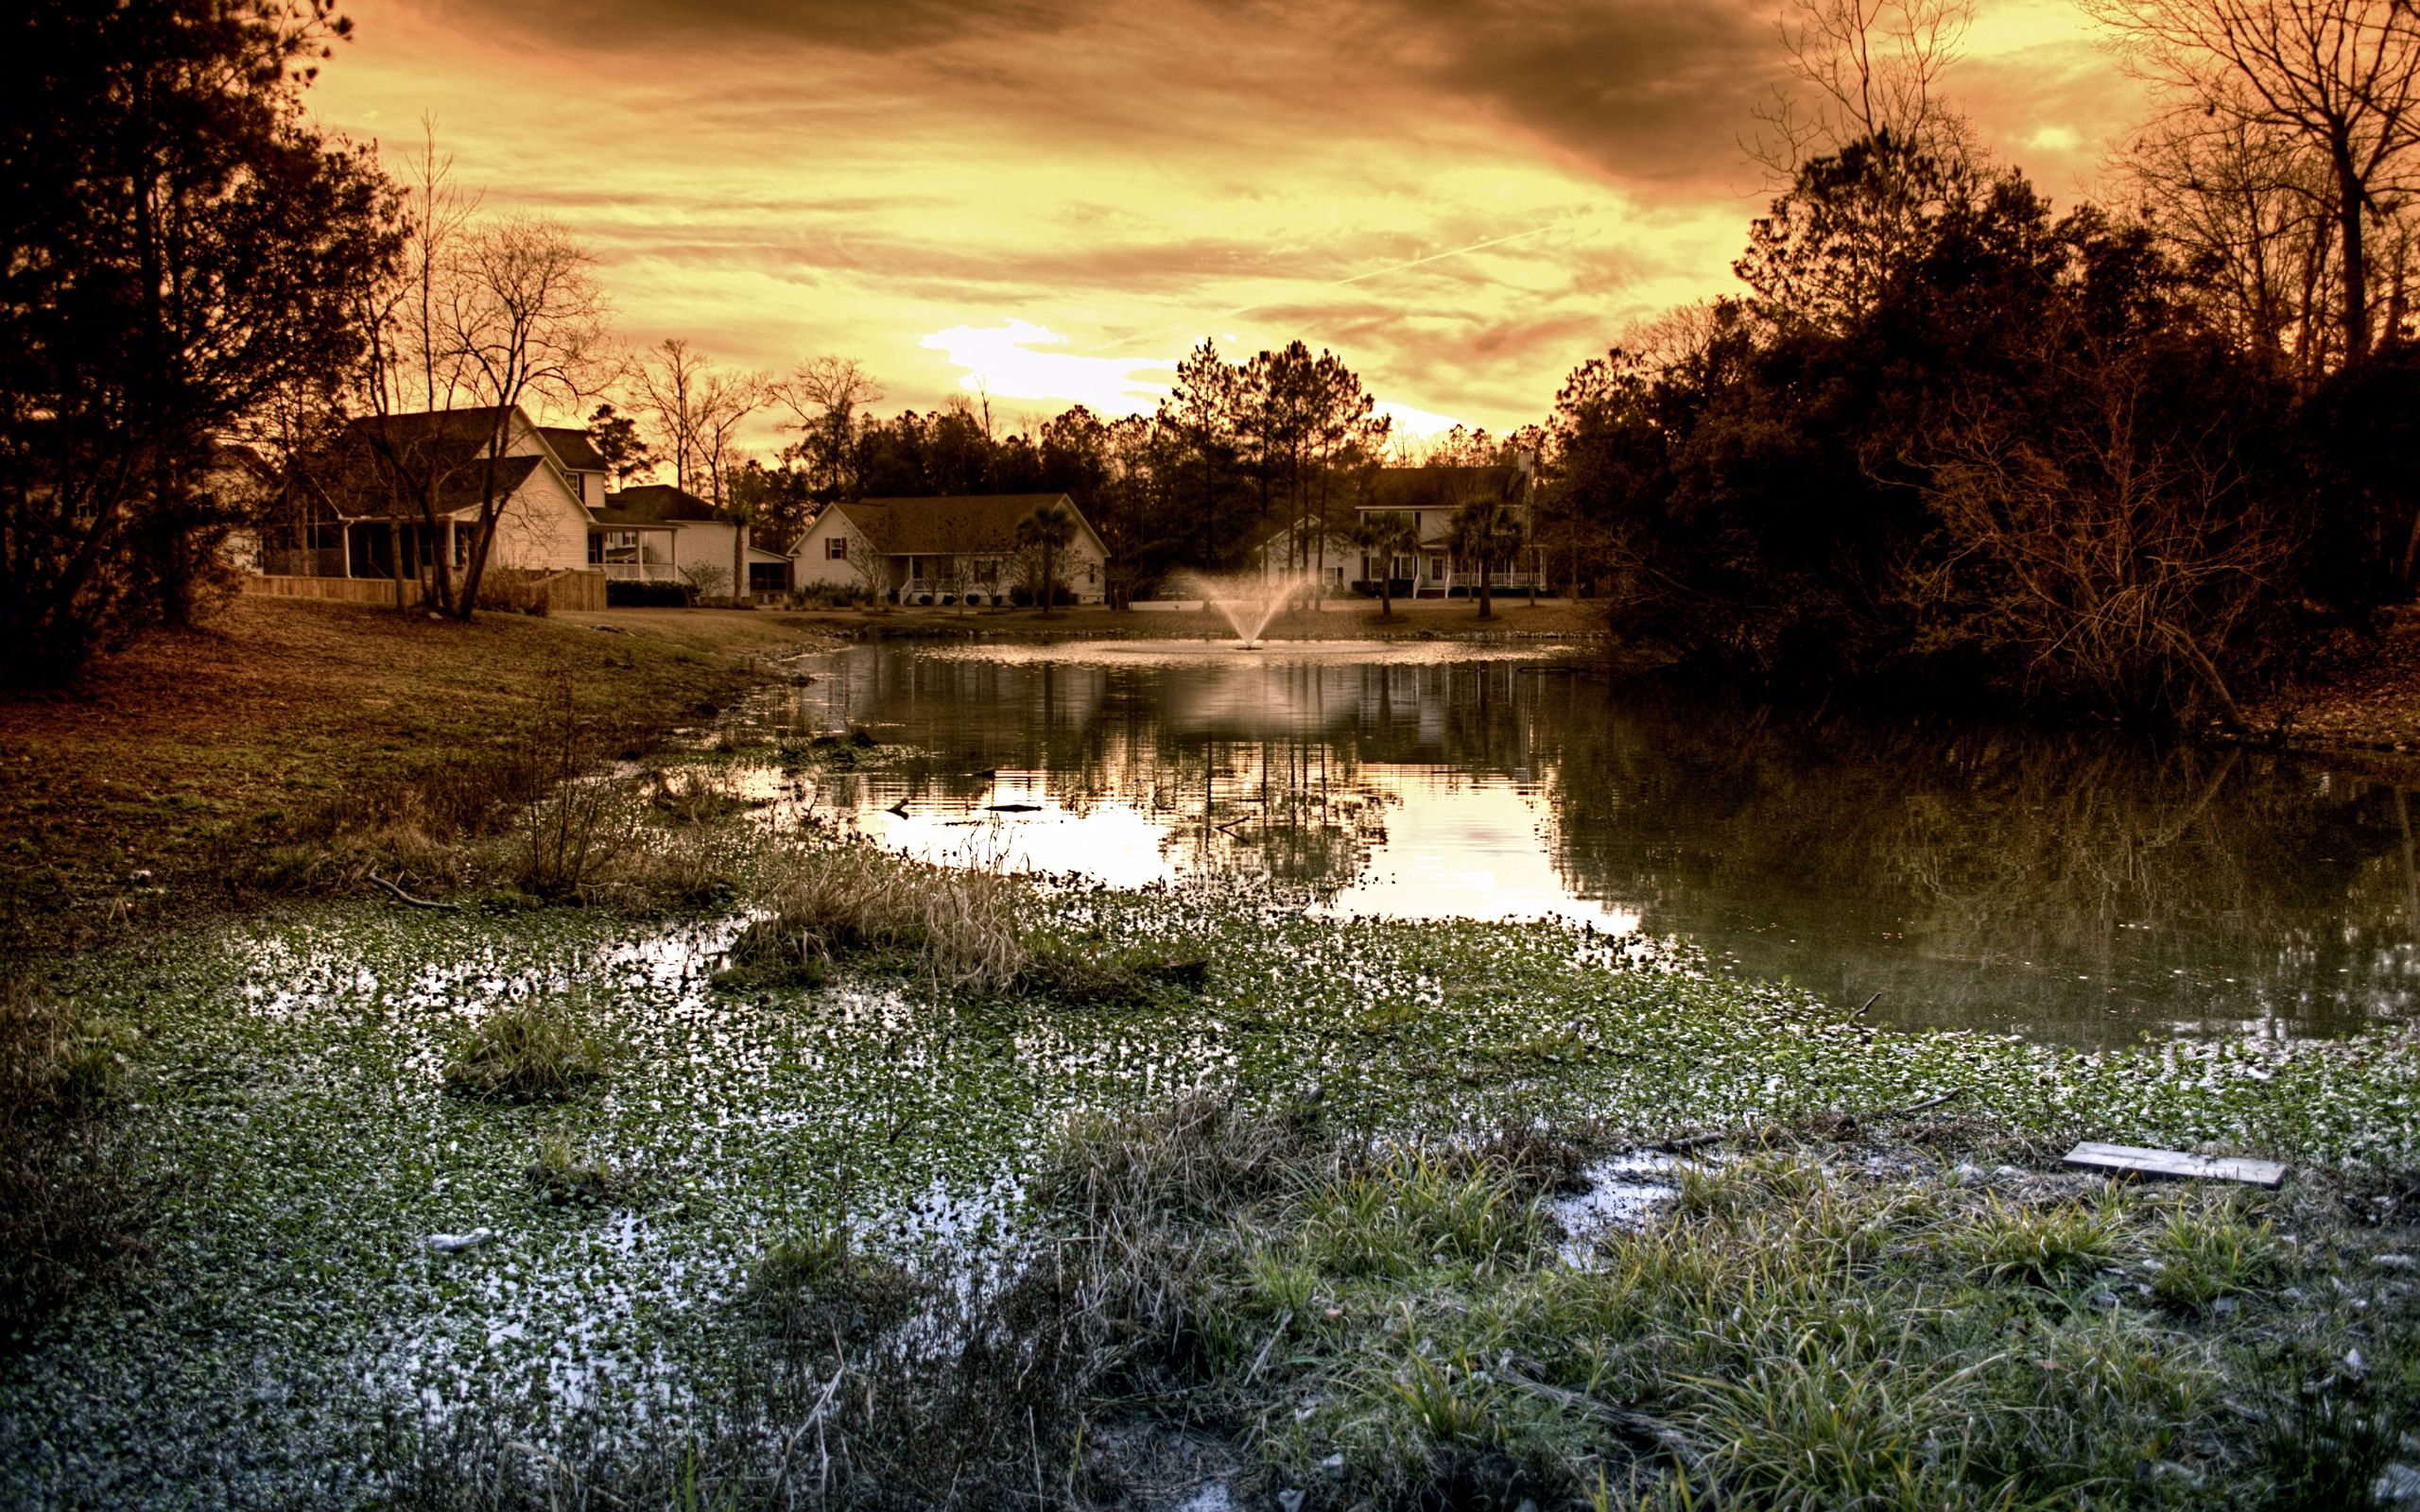 houses, nature, fountain, evening, mainly cloudy, overcast, pond